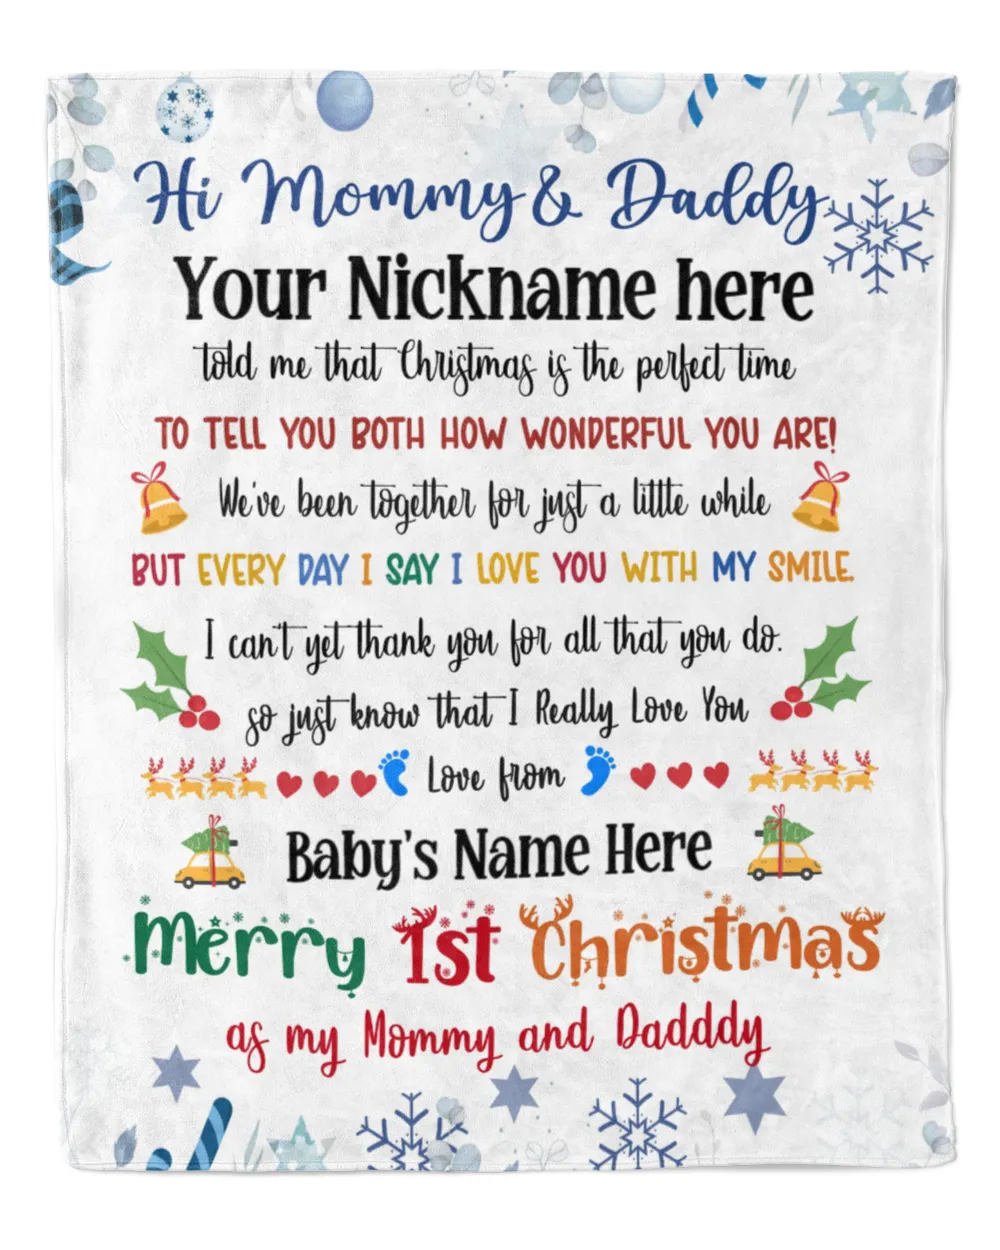 Personalized Baby's Name Blanket,  1st Chritmas Gift  for Dad and Mom from Baby and Grandparent,  First Christmas gifts for new parent. 1st Christasm Gift for baby